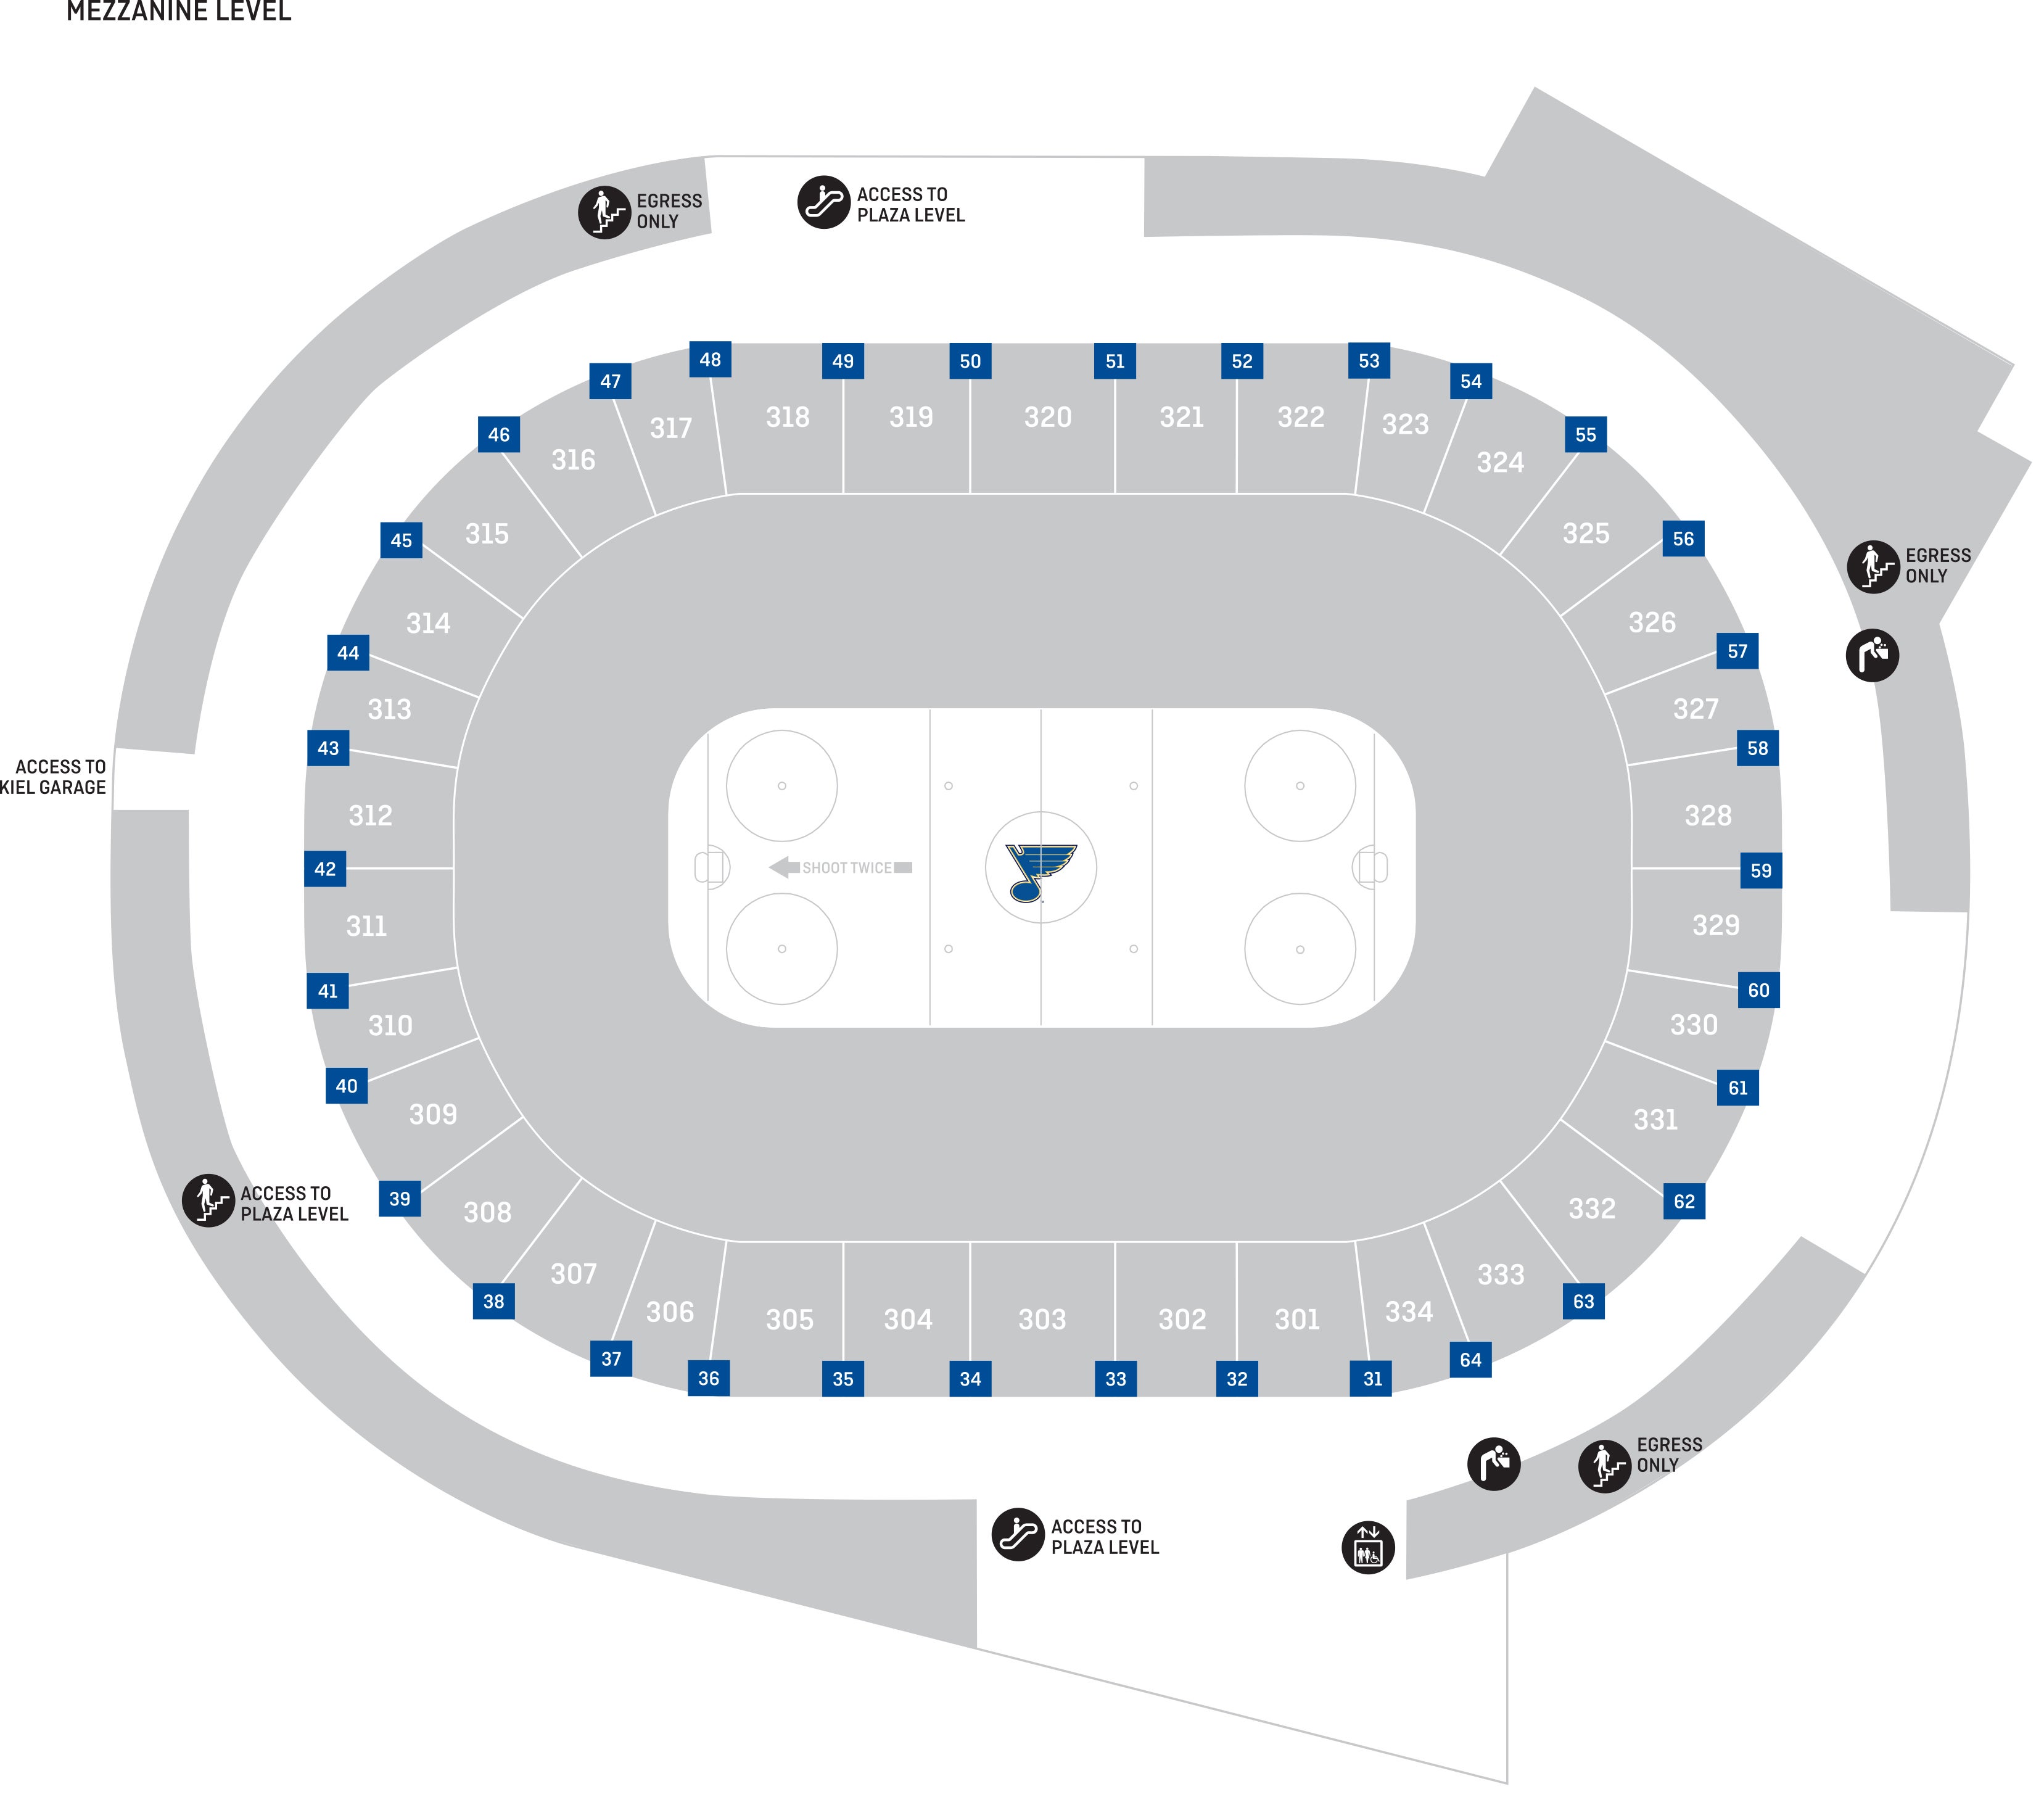 American Airlines Center Seating Chart + Rows, Seat Numbers and Club Seats